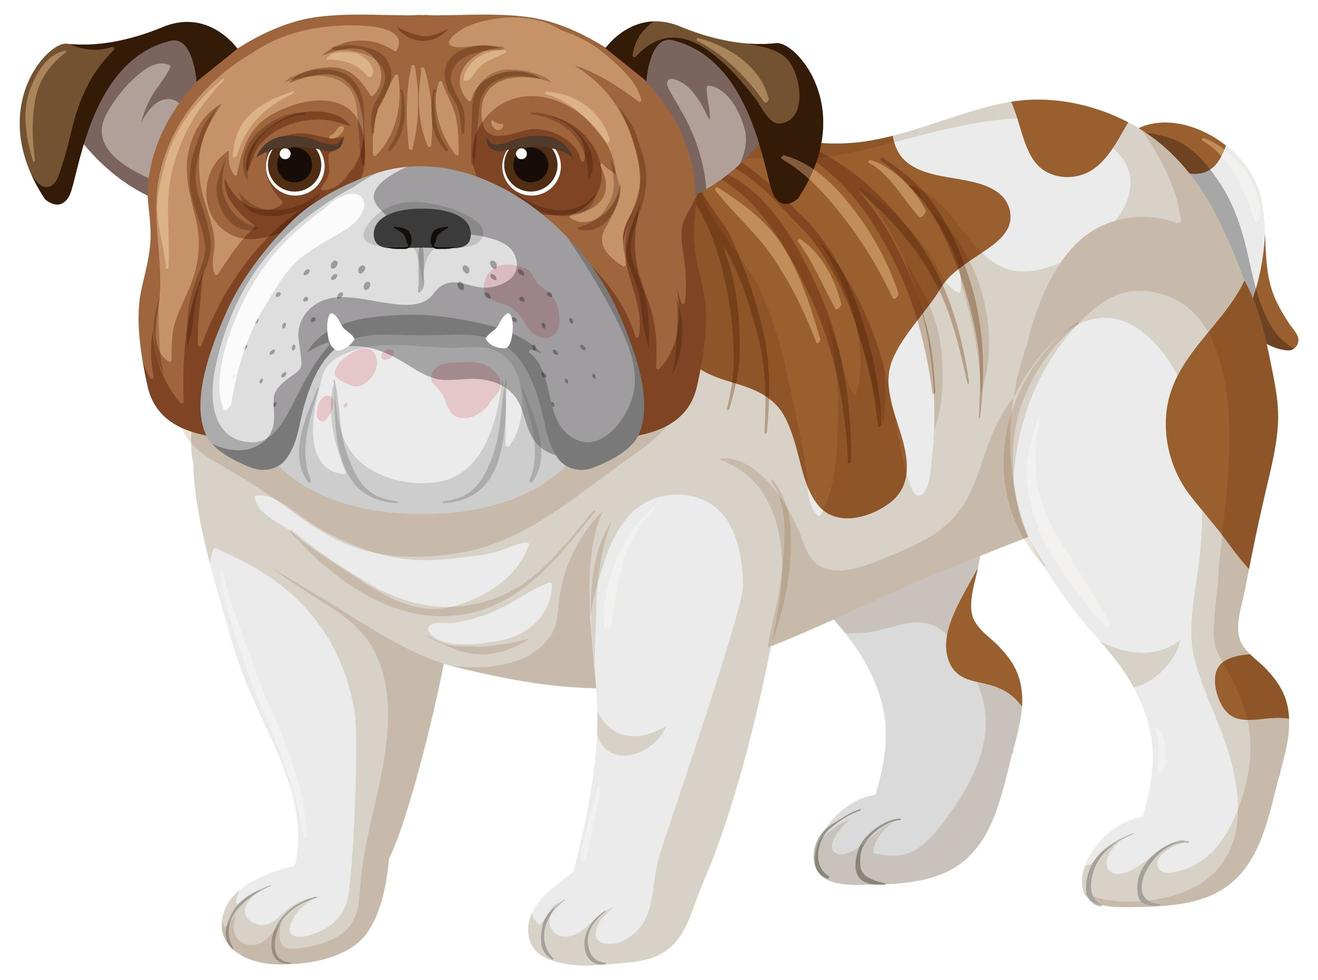 Boxer cartoon style on white background vector